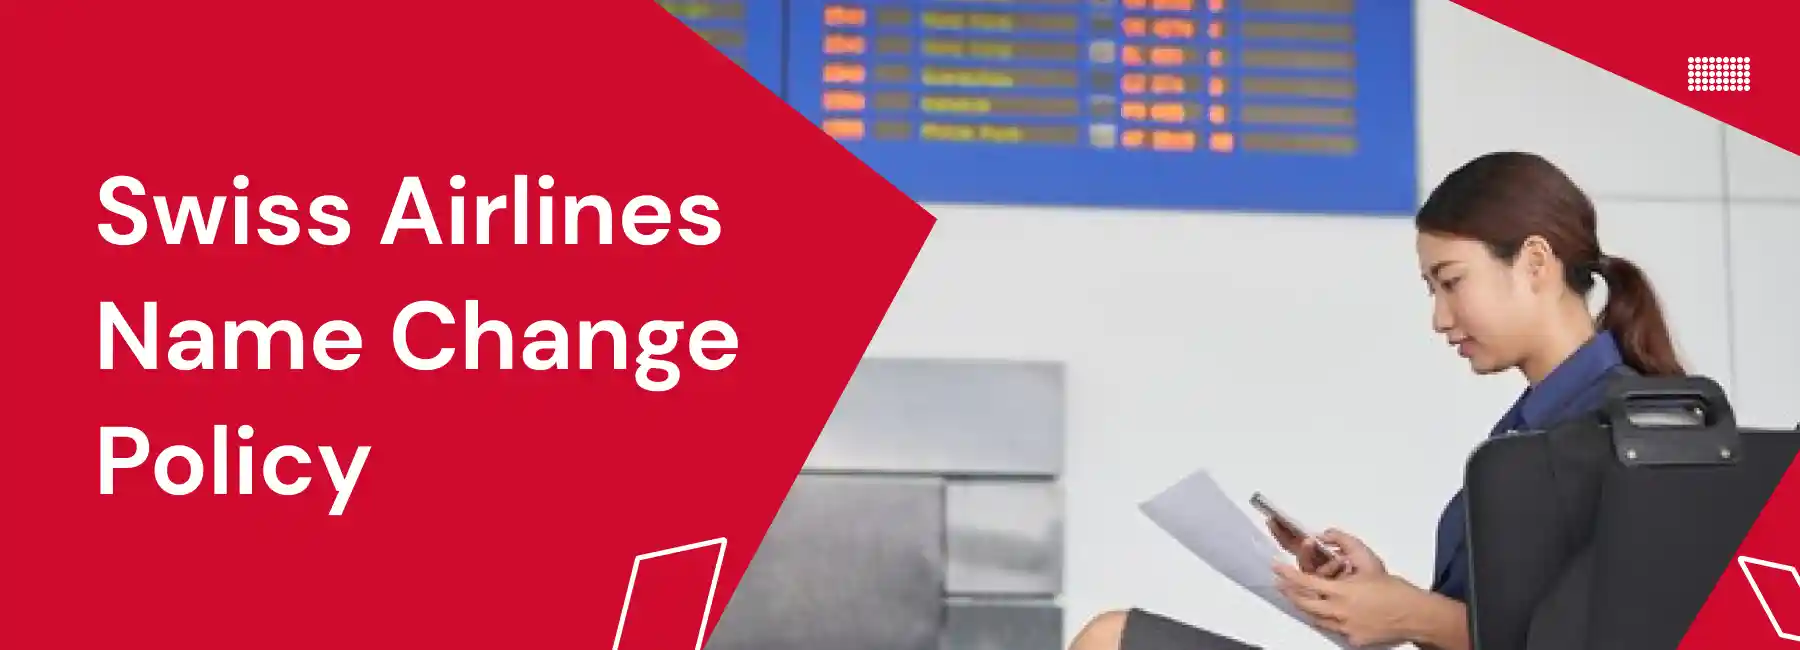 Swiss Airlines Name Change Policy